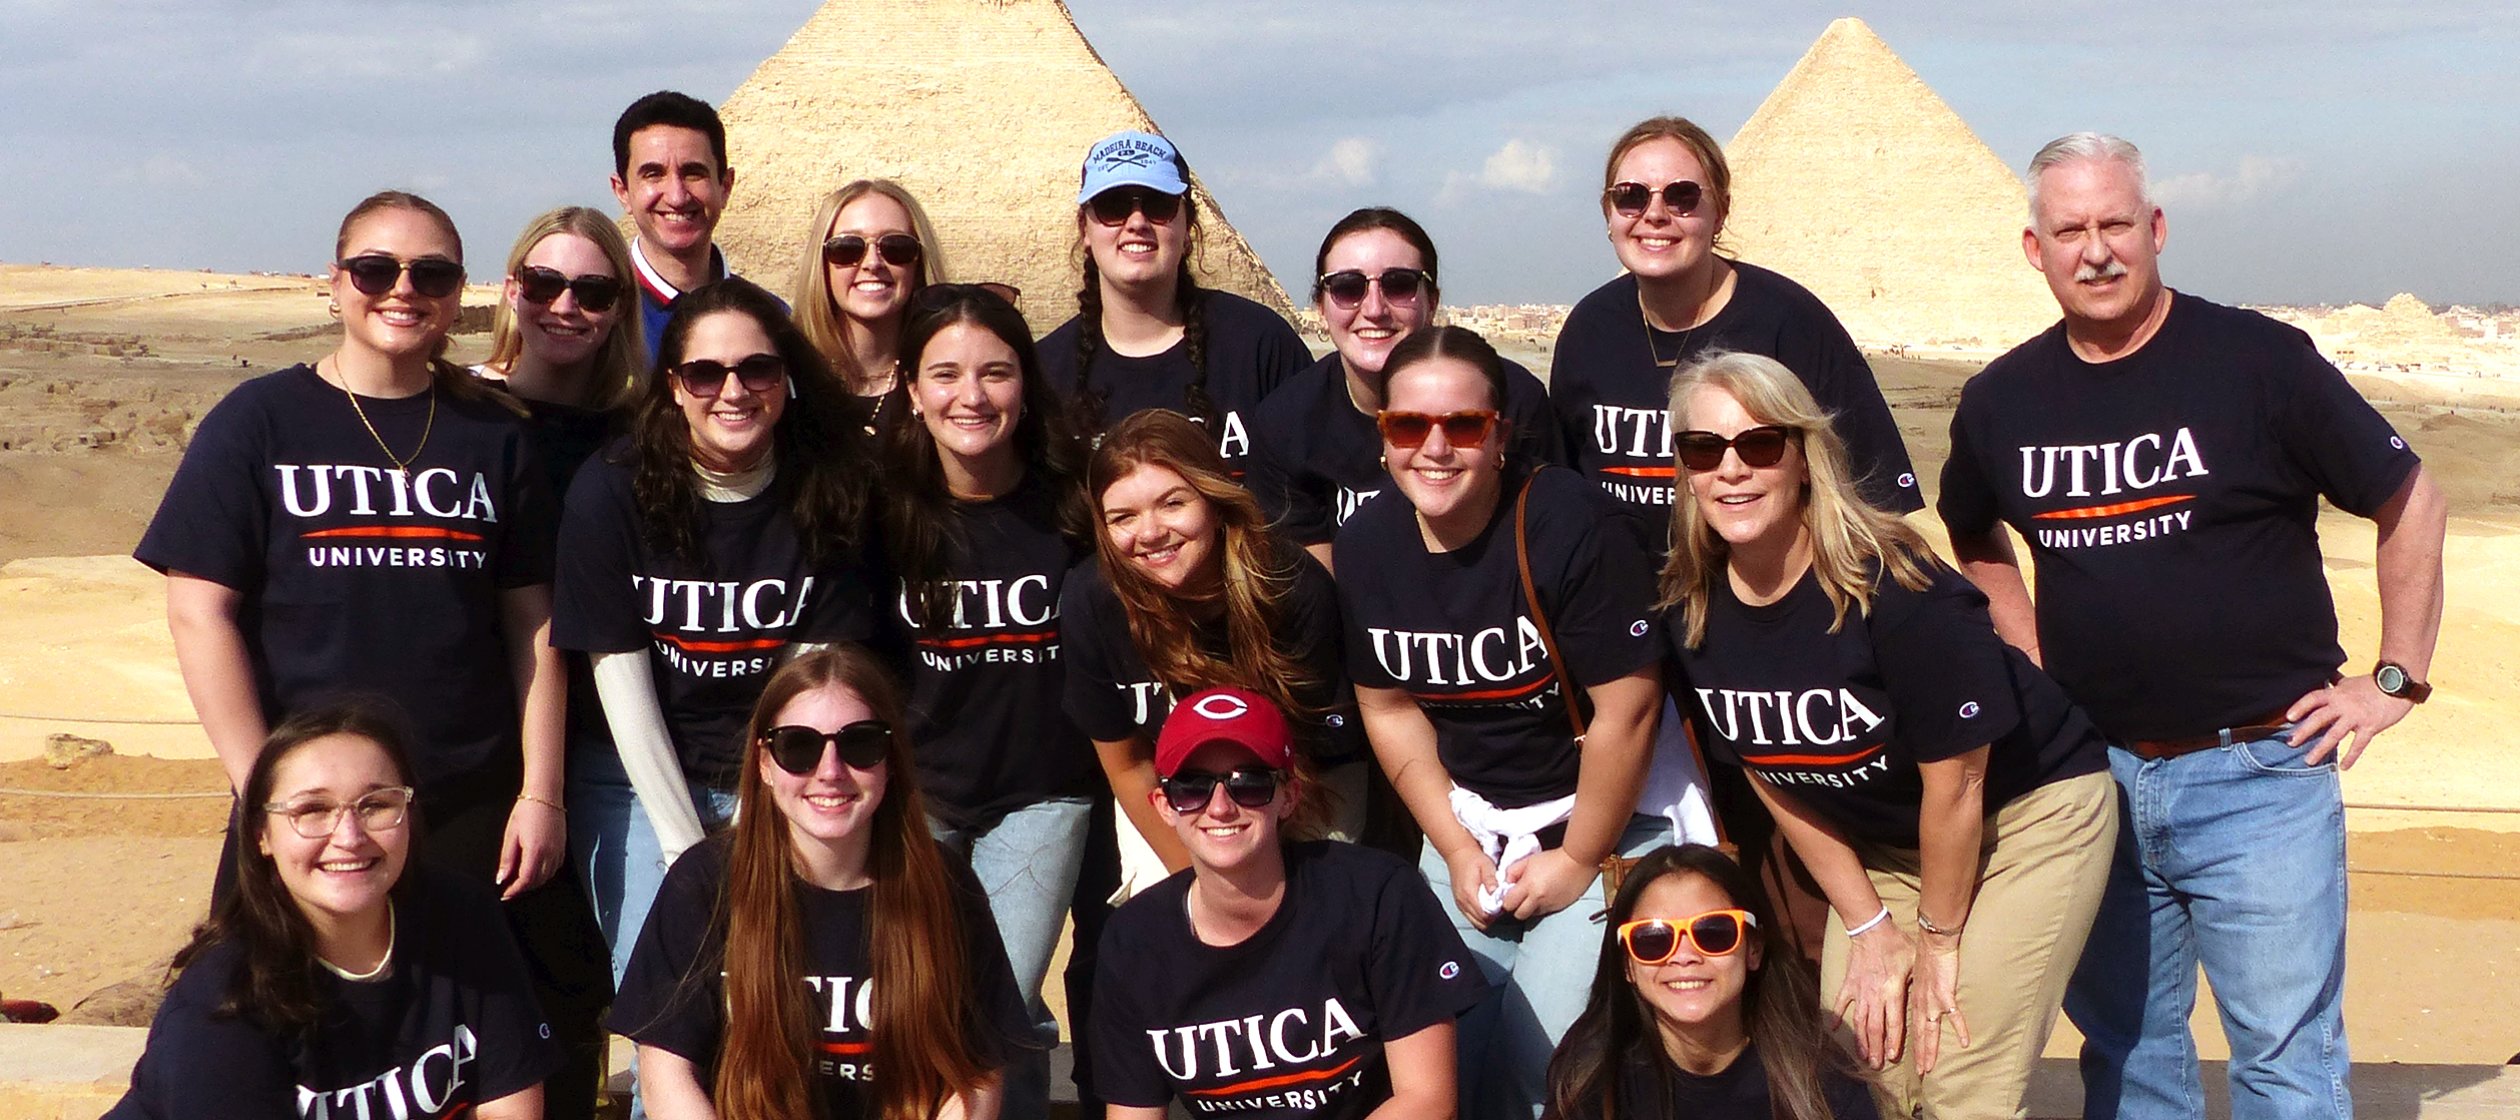 Utica University students and faculty at Giza, Egypt